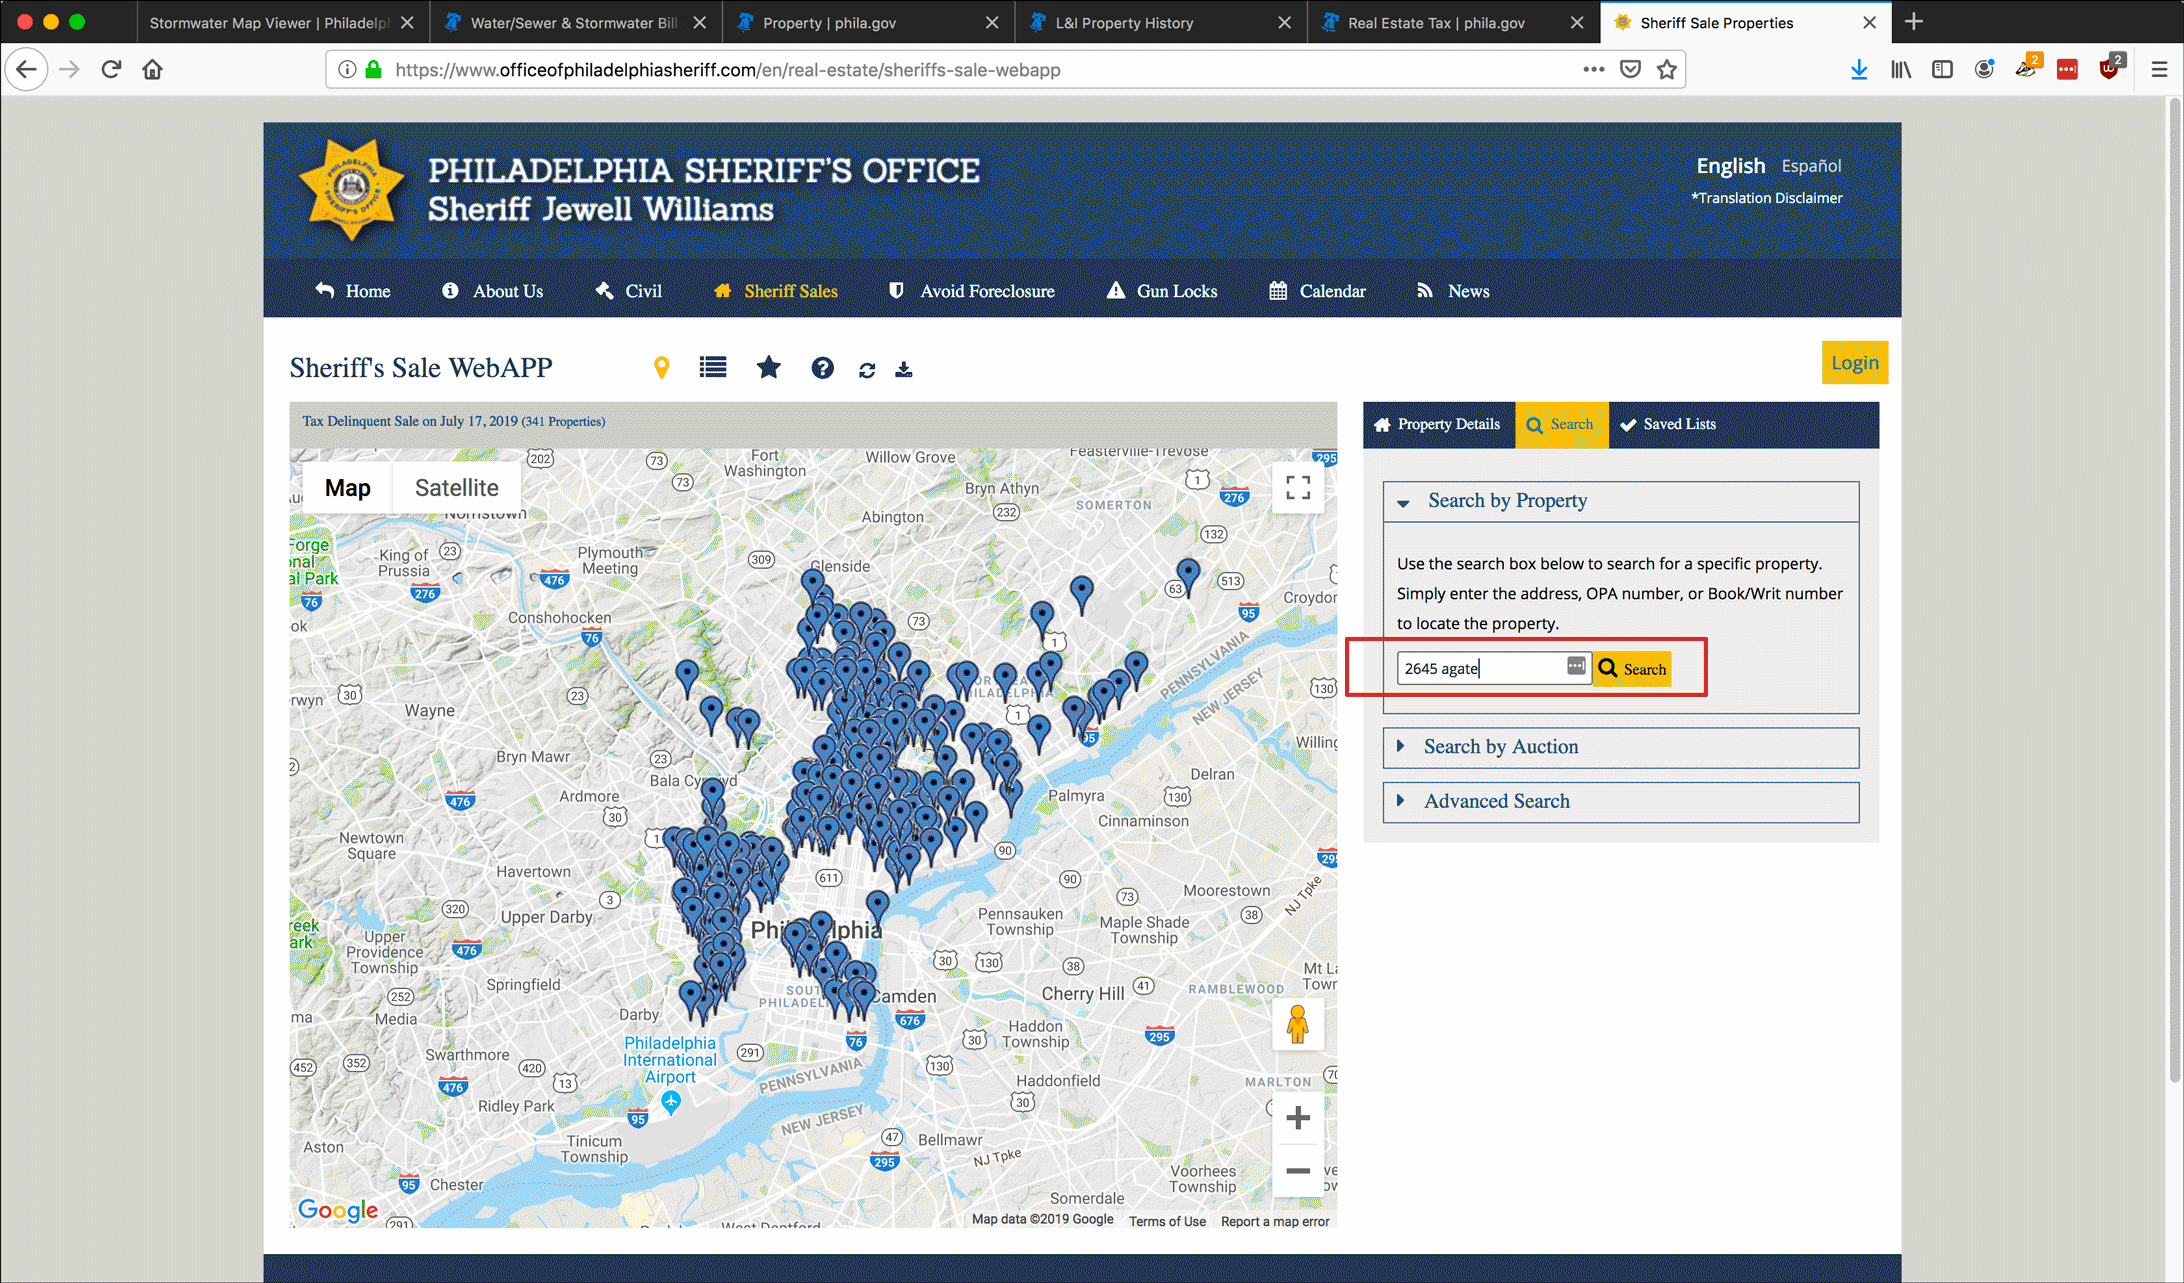 Screenshot illustrating research of property and Sheriff's sale information on the Philadelphia Sheriff's website.